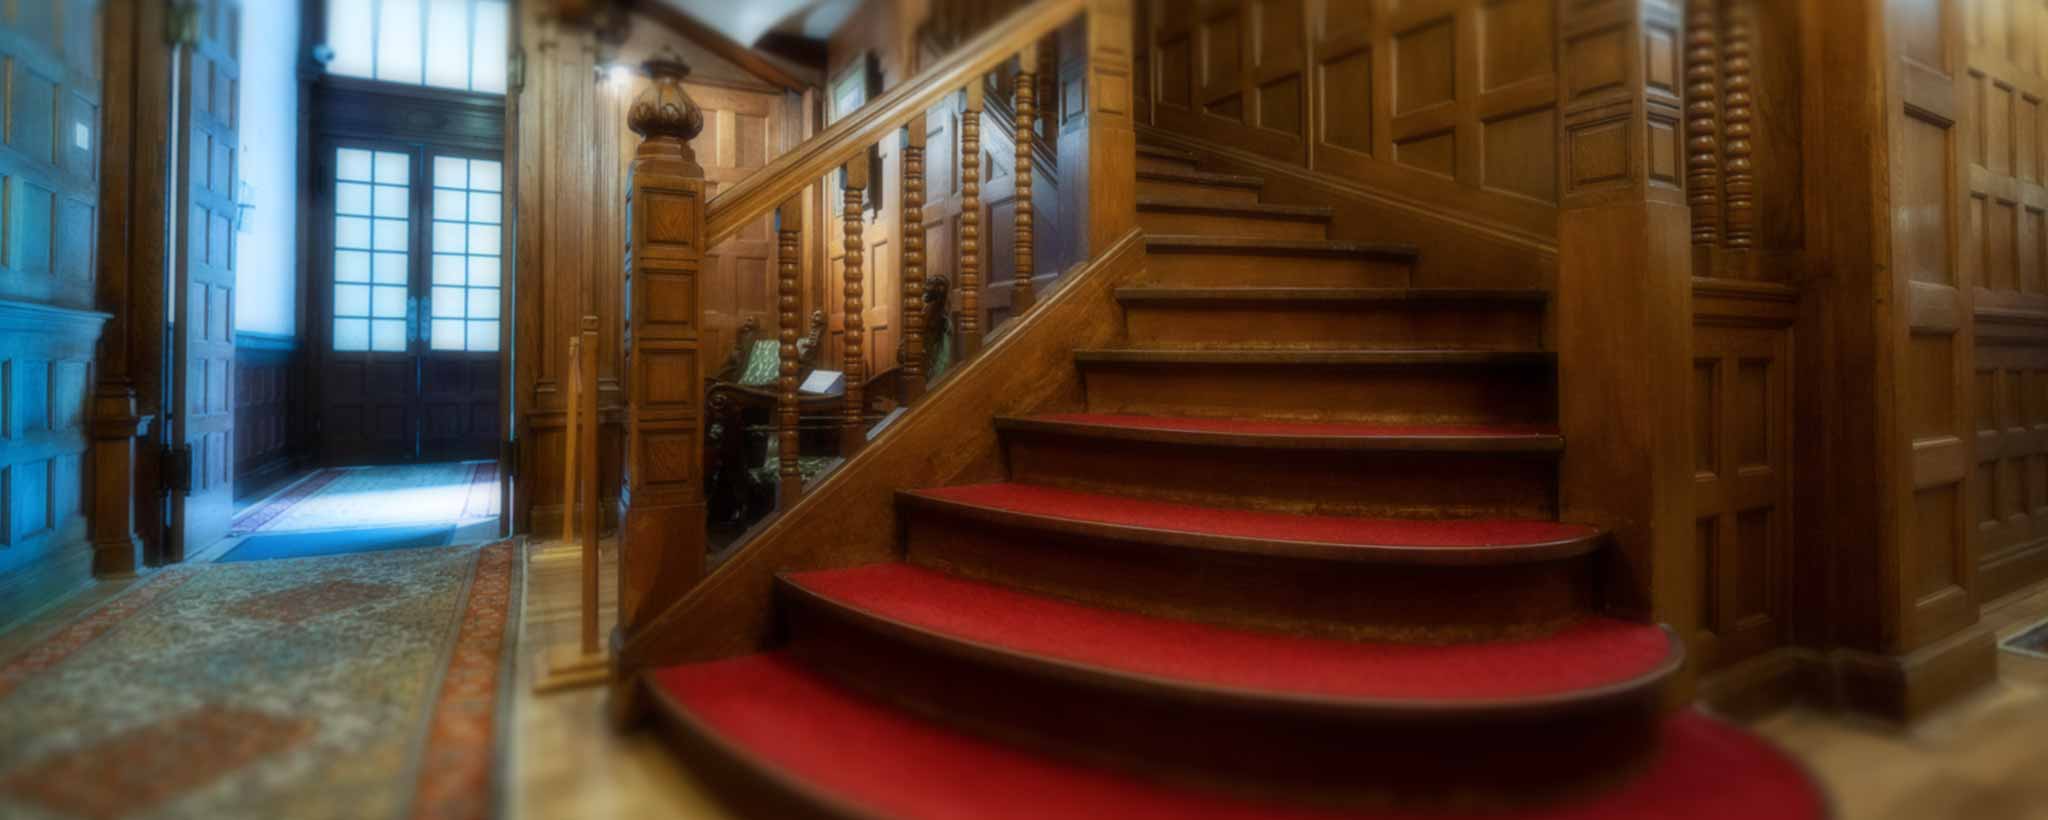 'Mansion staircase'